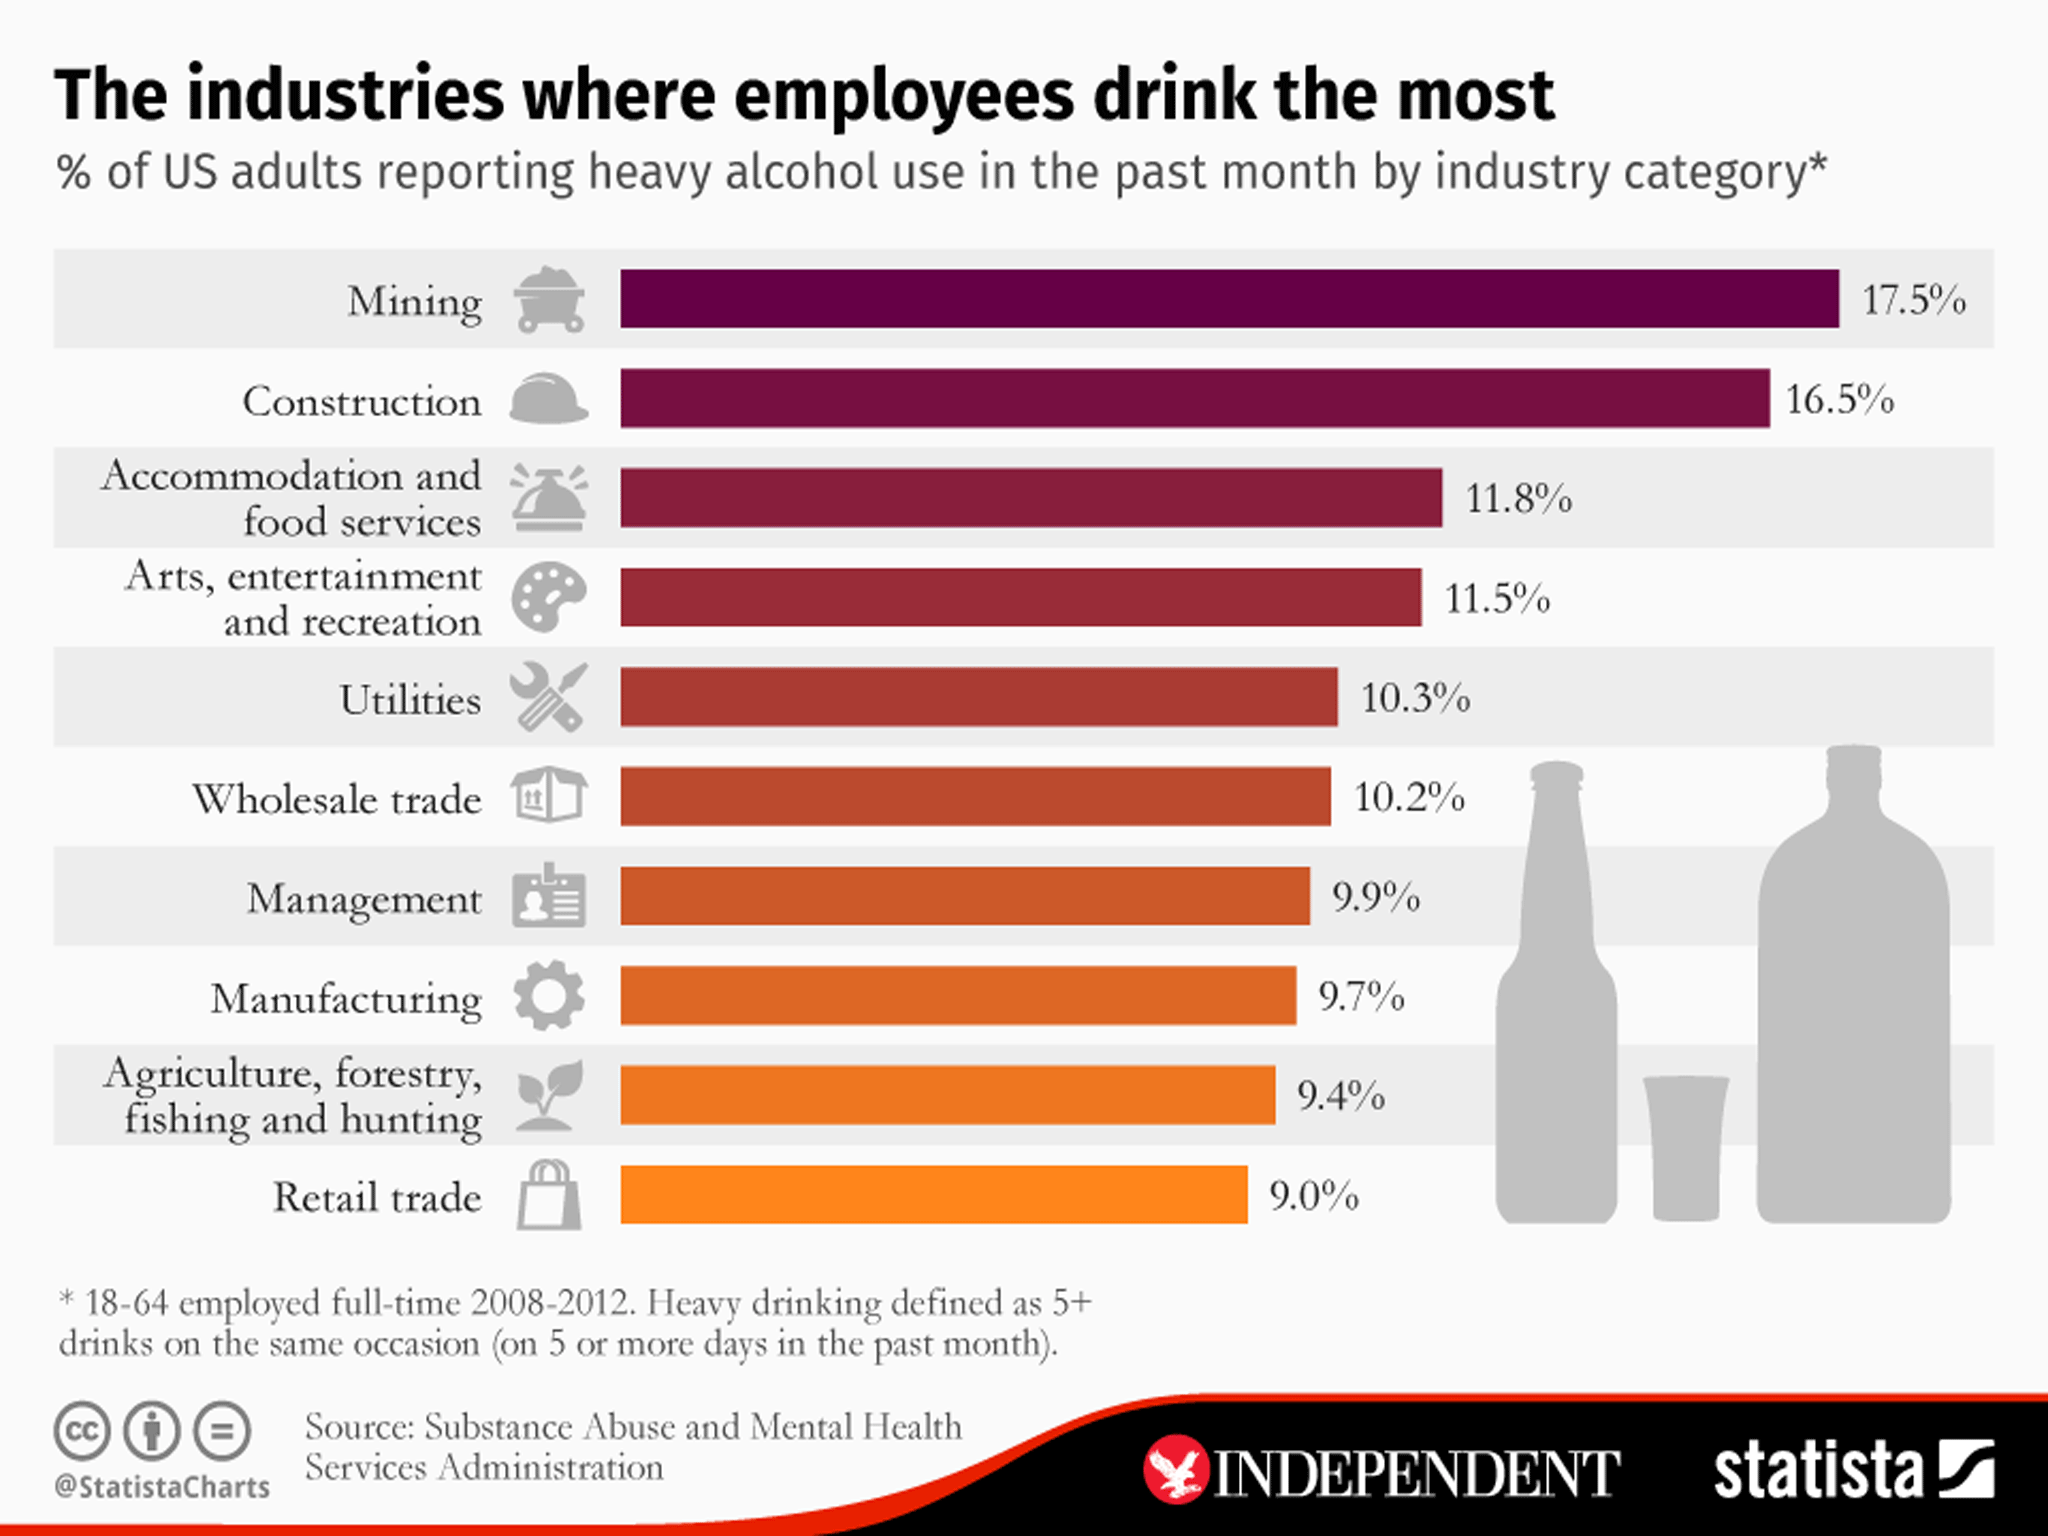 Jobs with heaviest alcohol consumption revealed